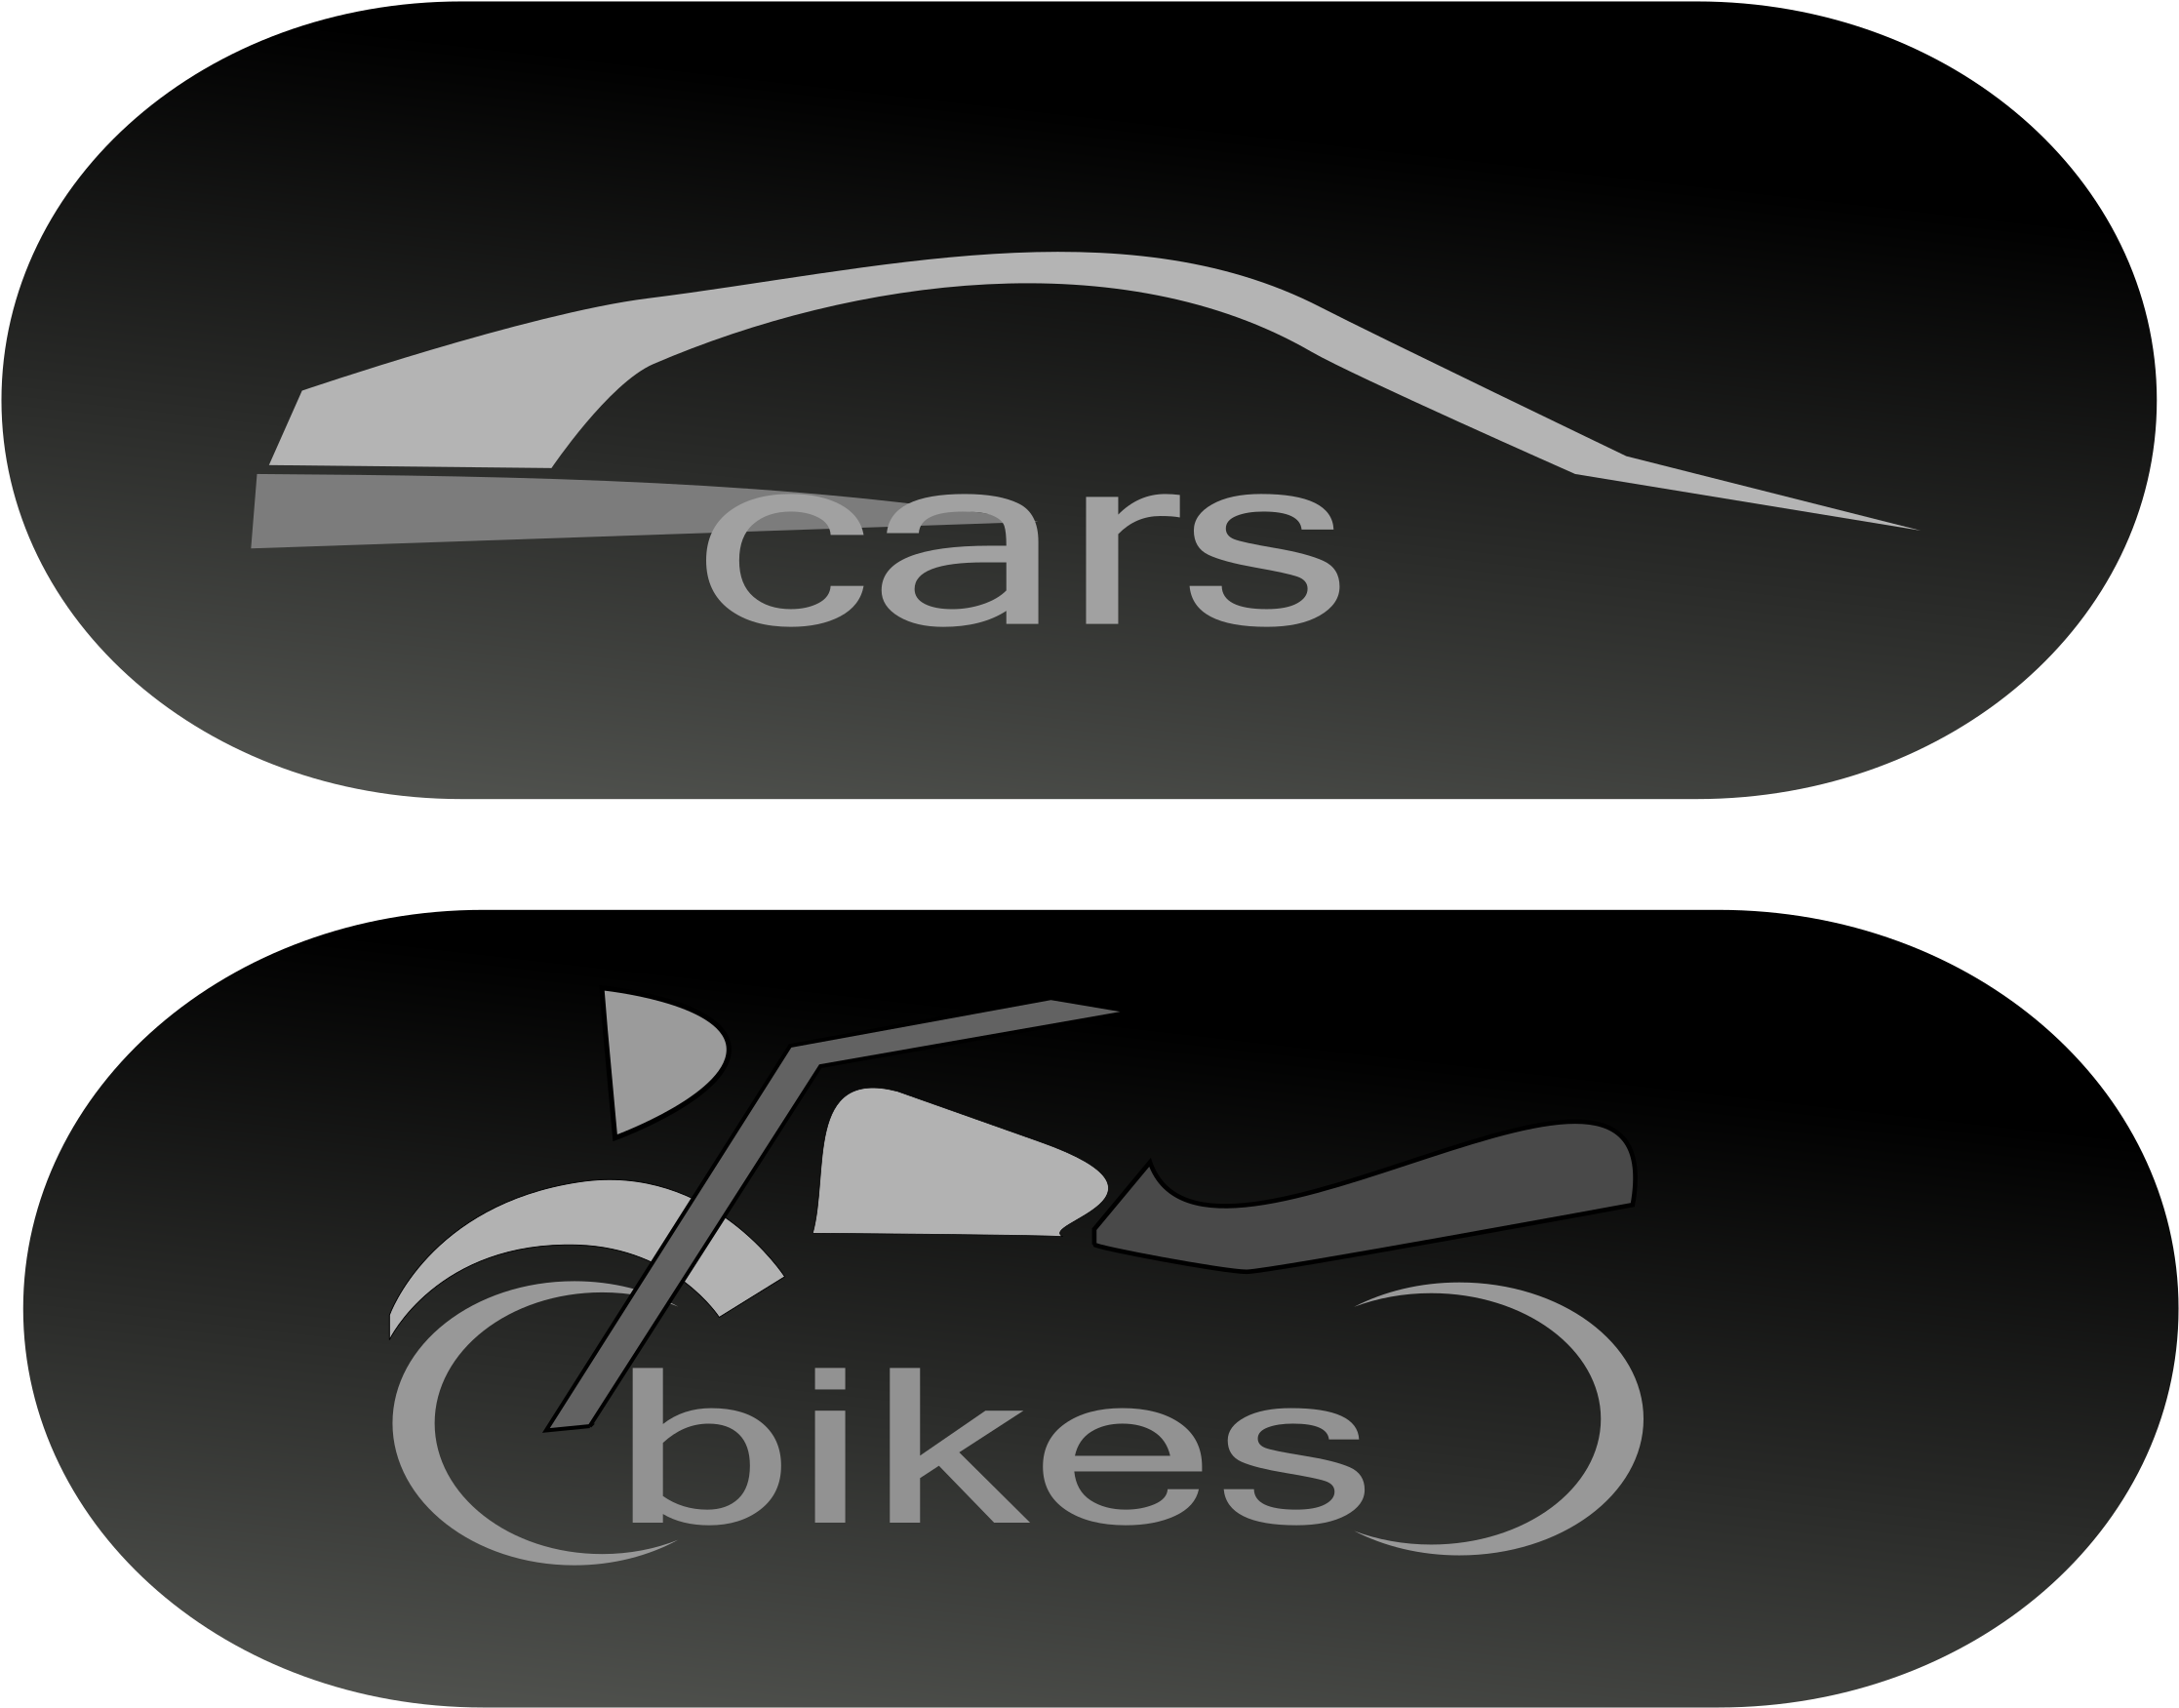 This Free Icons Png Design Of Cars And Bikes - Cars And Bikes Logo Clipart (2400x2100), Png Download